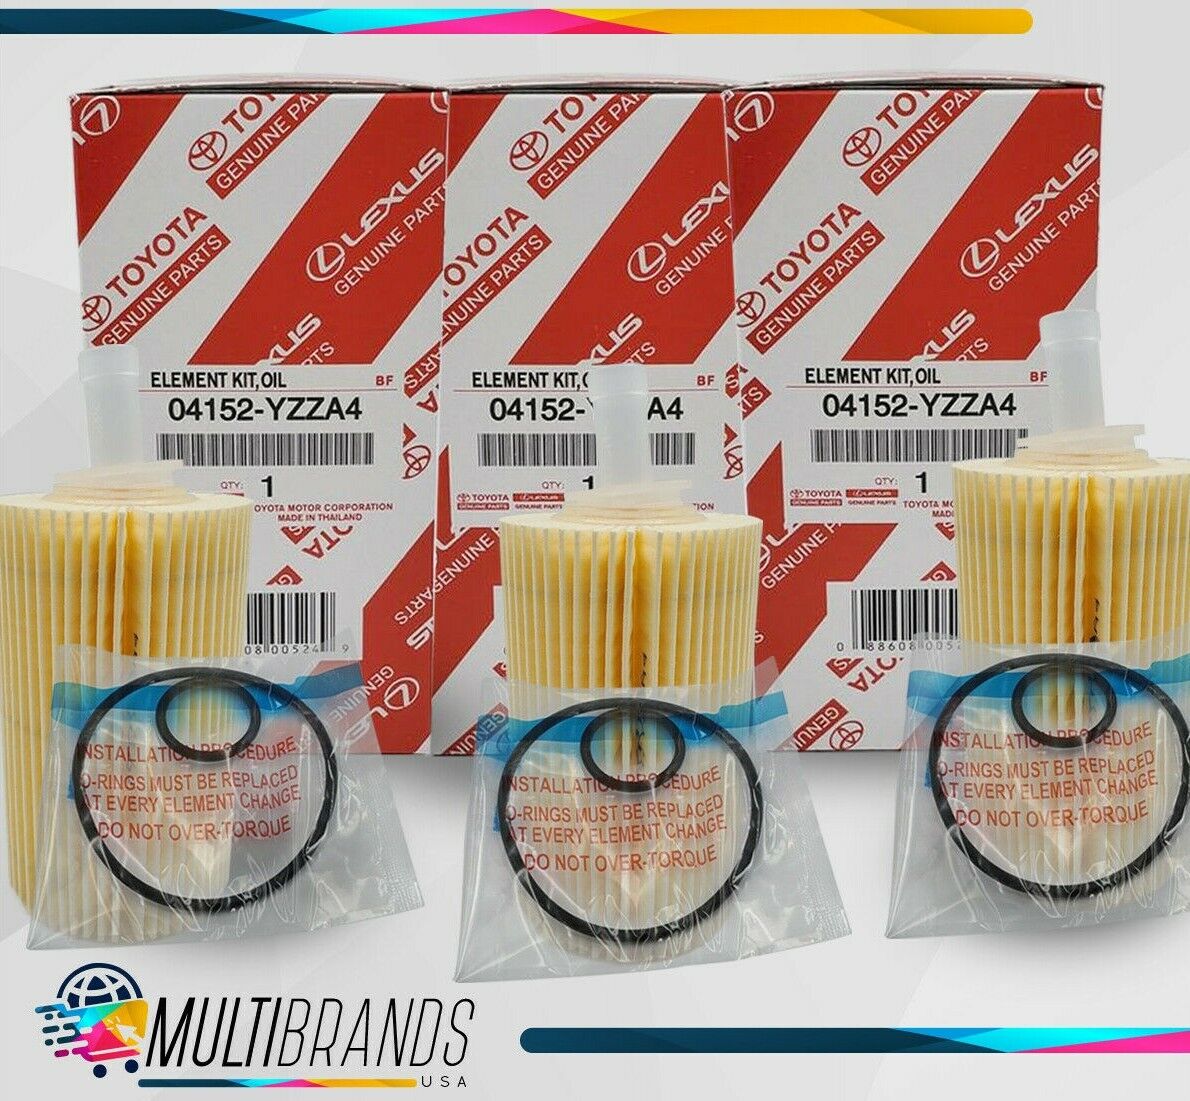 Toyota Oil FIlter 04152-YZZA4 Pack of 3 - SAME DAY SHIPPING FROM USA